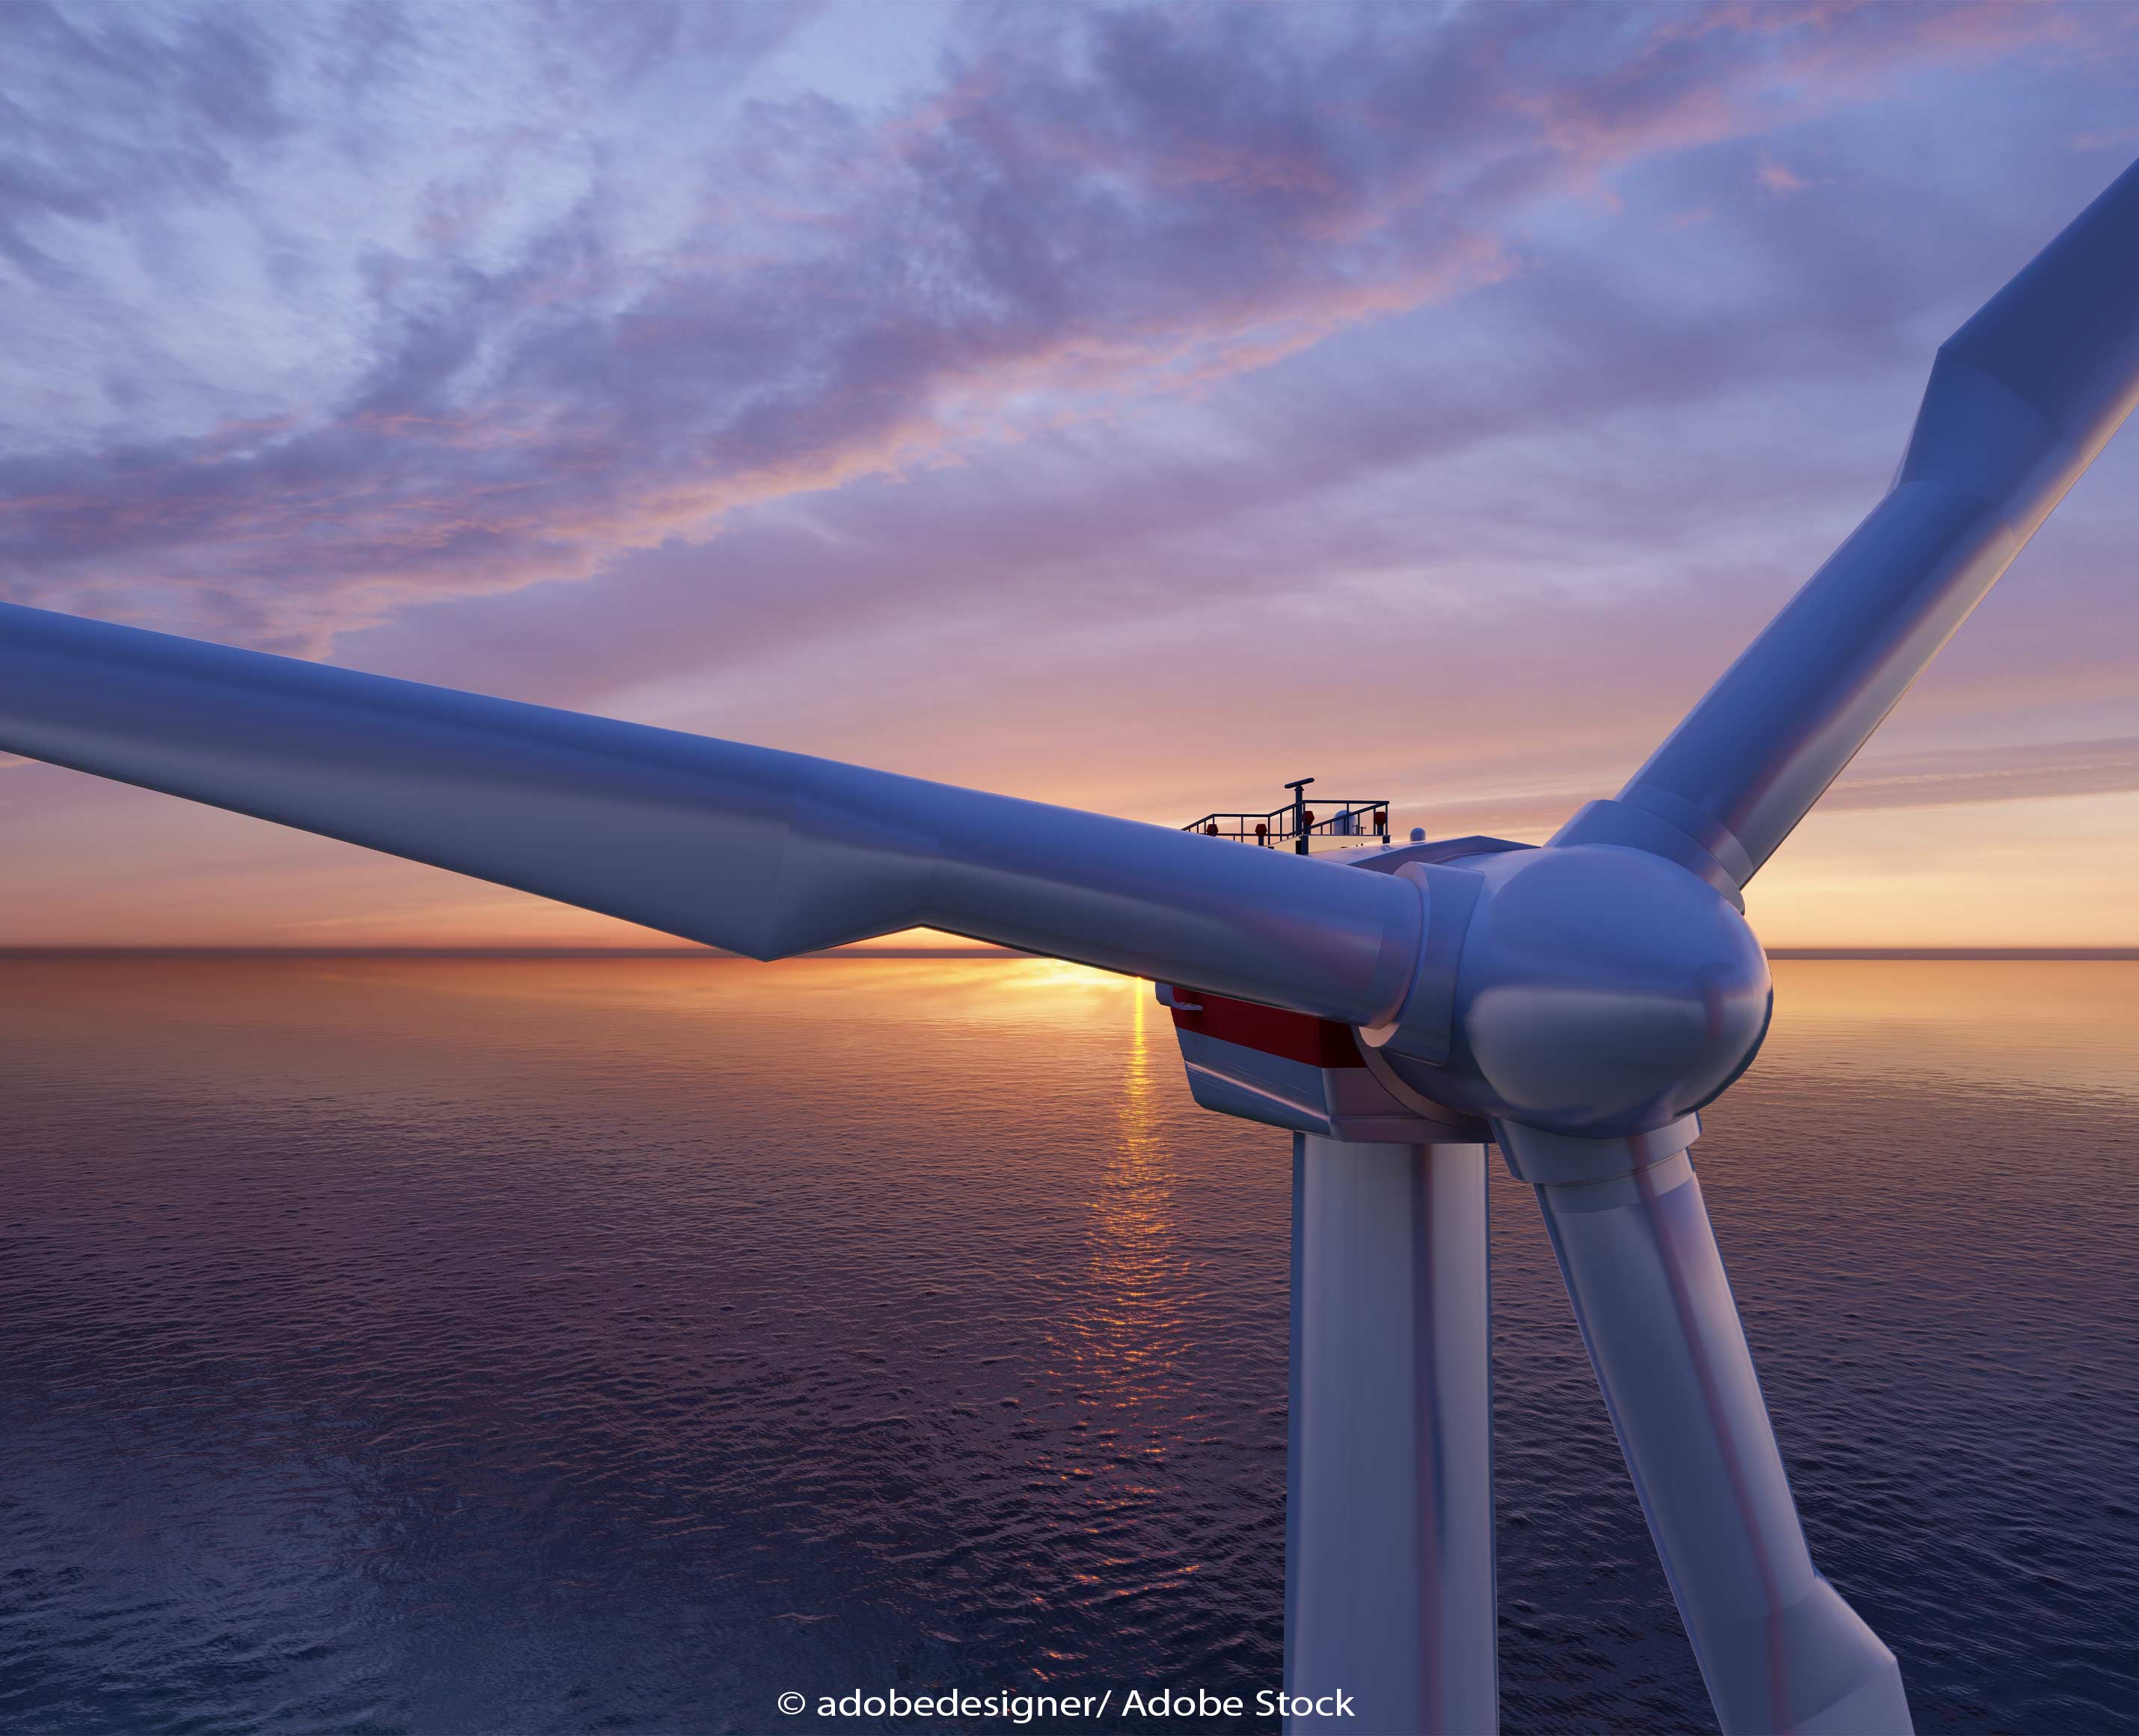 New Floating Wind Farm Will Power 4 million Homes And Create Jobs